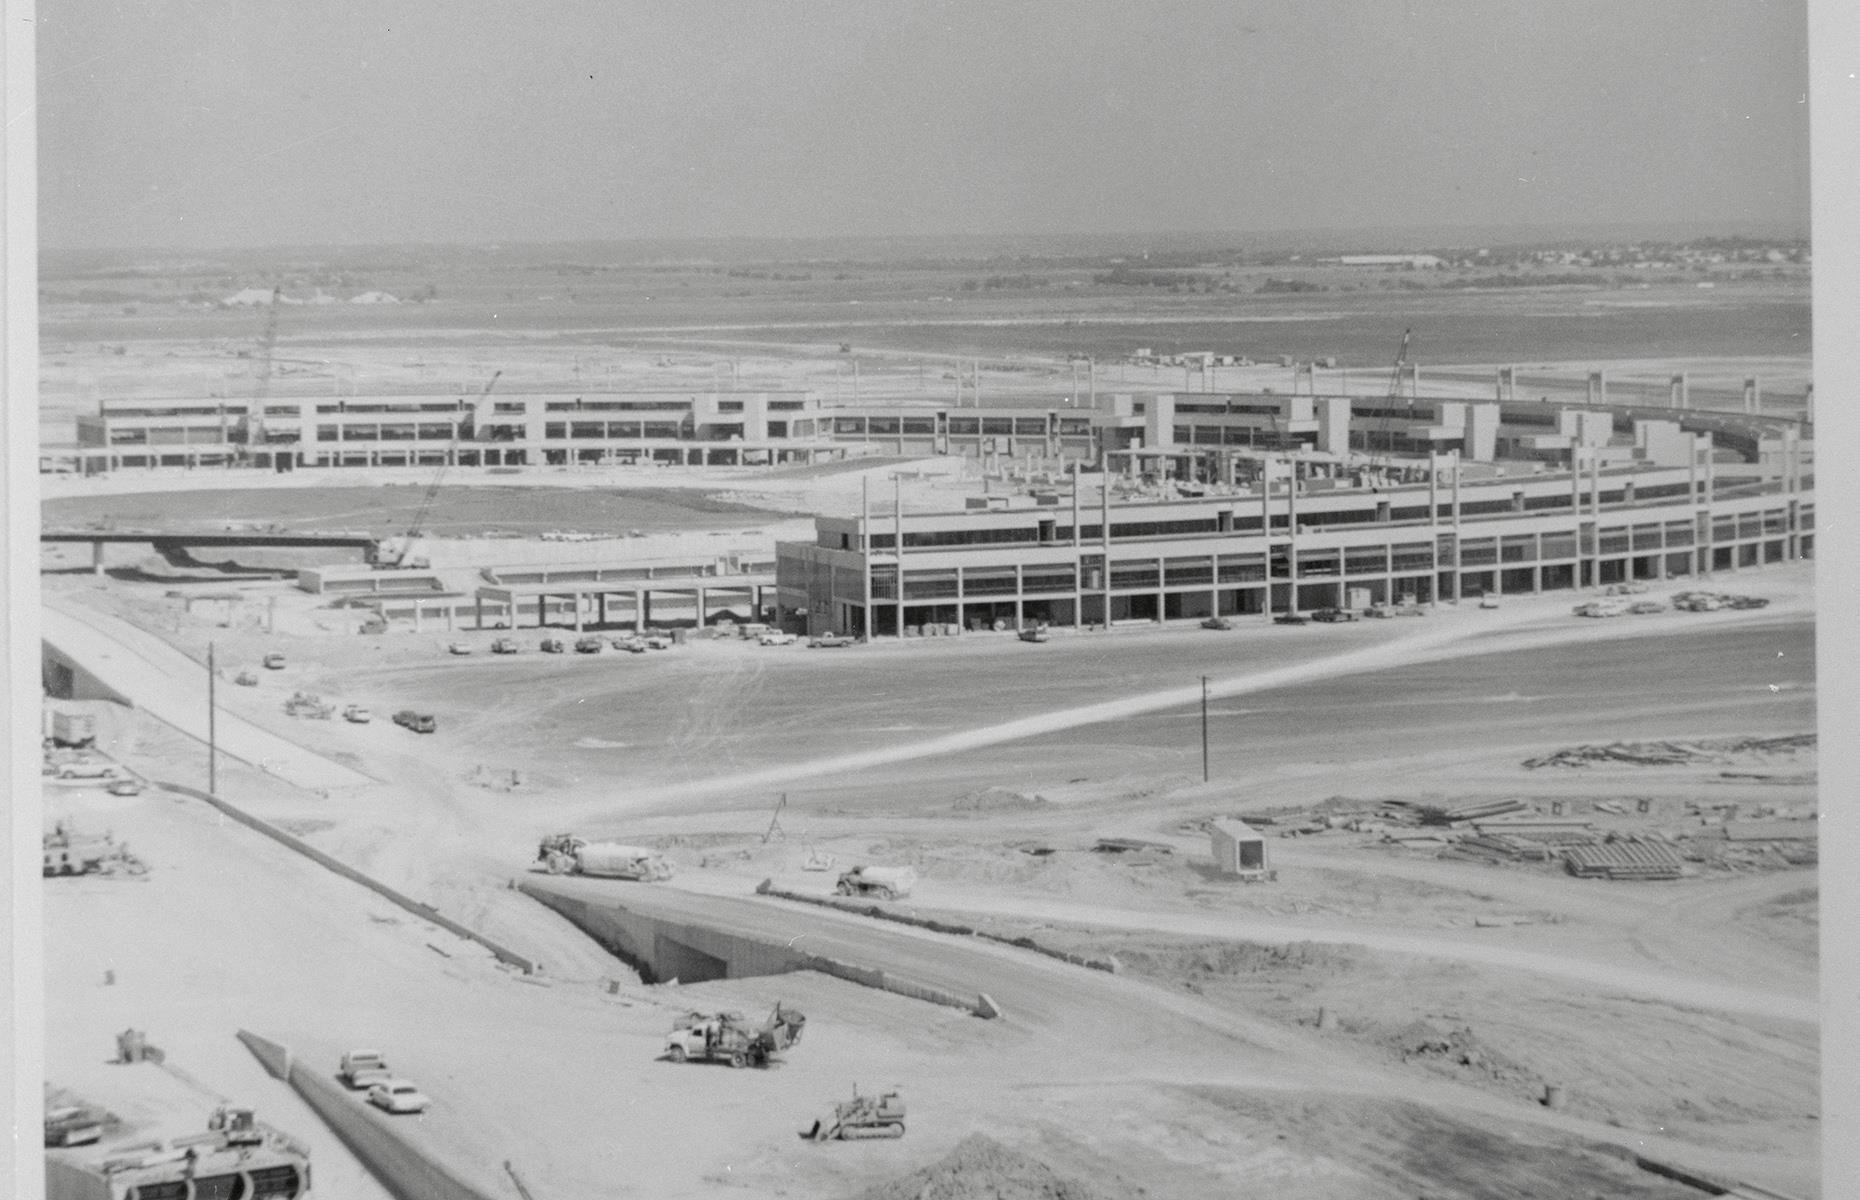 <p>Although Dallas-Fort Worth International Airport (pictured here during construction) didn’t begin operations until 1974, it formed as an idea much earlier. Before DFW opened people were flying between the two cities on a regular basis, prompting discussions about building a large airport in between them as far back as the 1930s. The first collaboration was a small military airport erected between the two cities during the Second World War, but it took another three decades for Dallas and Fort Worth to agree on where to build a shared commercial airport.</p>